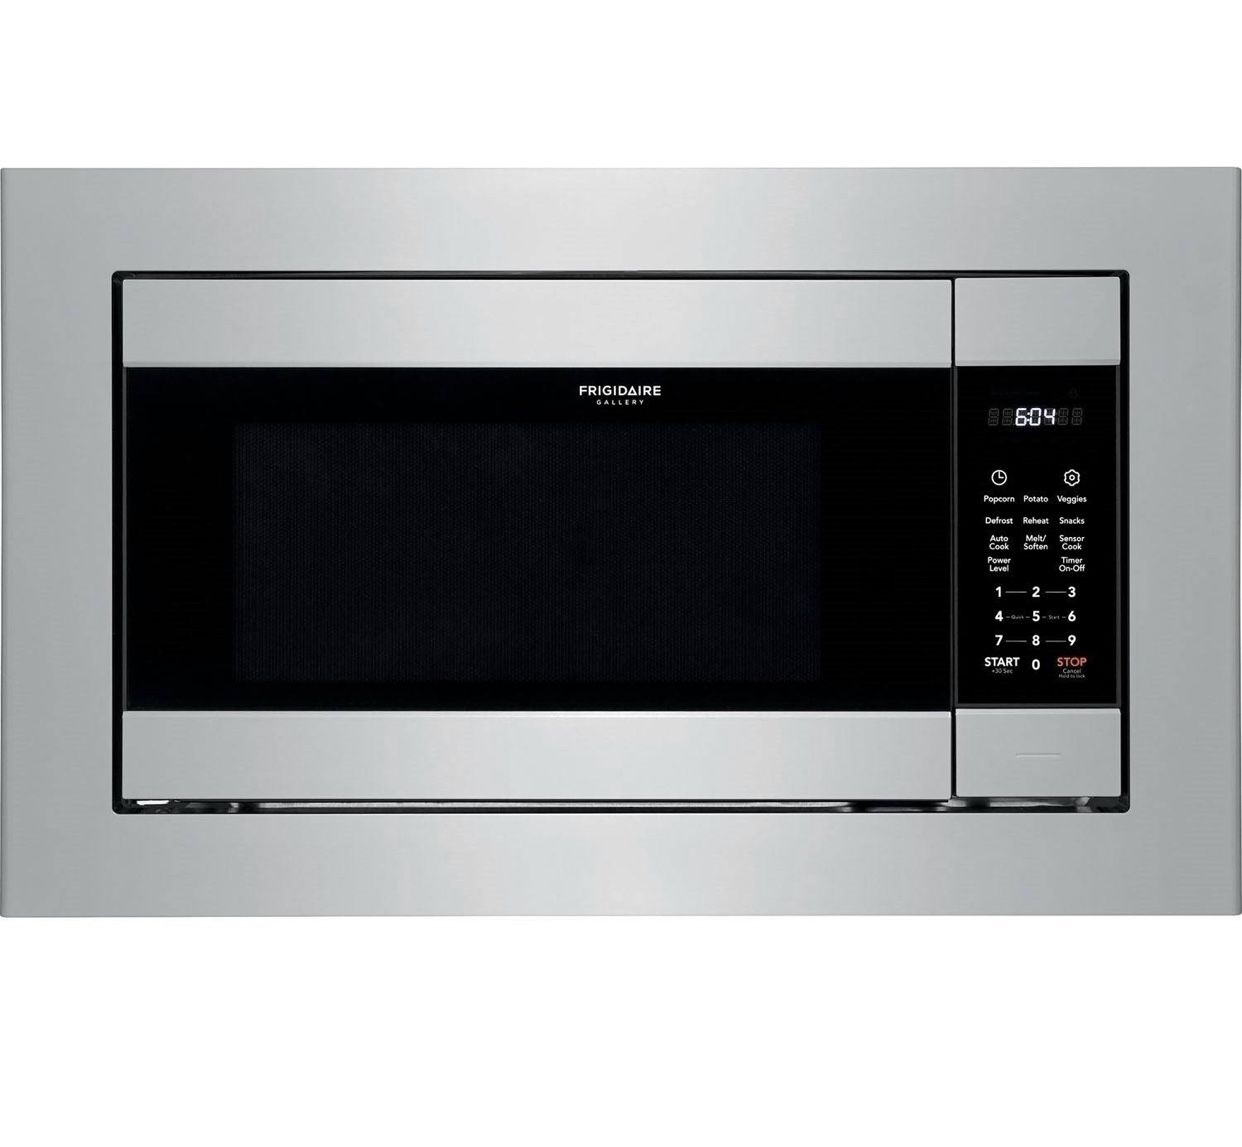 Frigidaire FGMO226NUF 24" Stainless Sensor Built-In Microwave